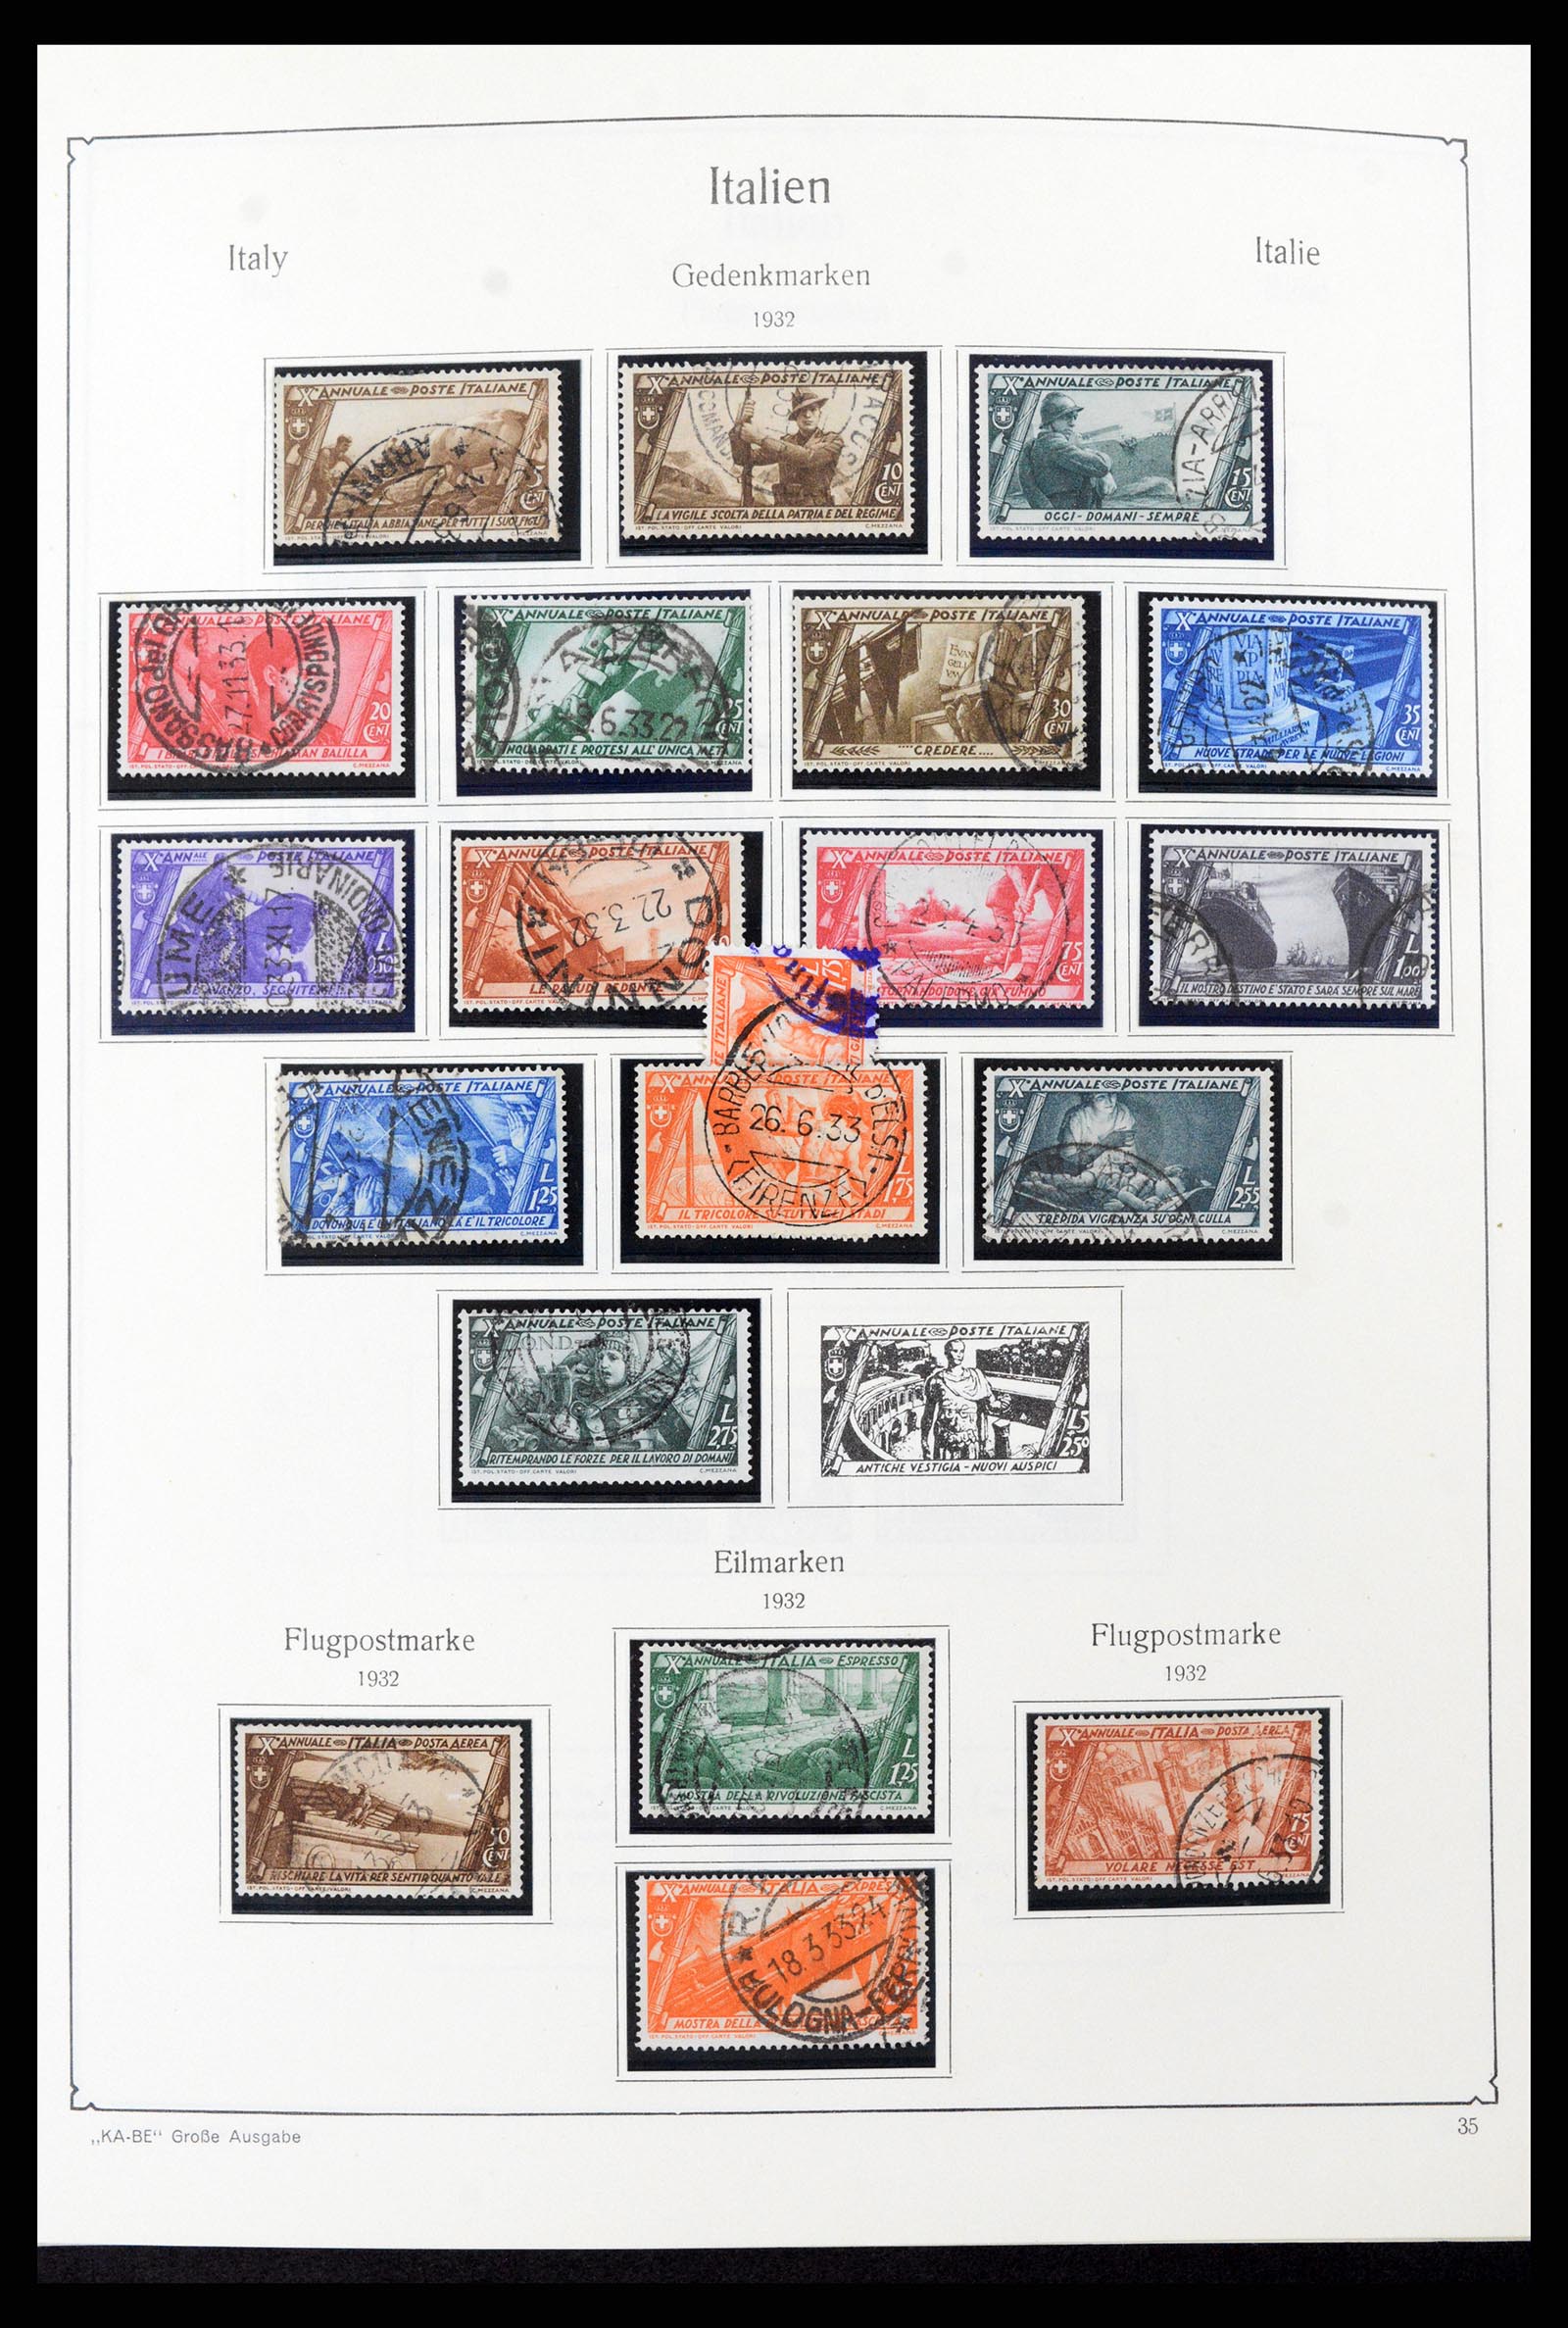 37605 053 - Stamp collection 37605 Italy and States 1855-1974.